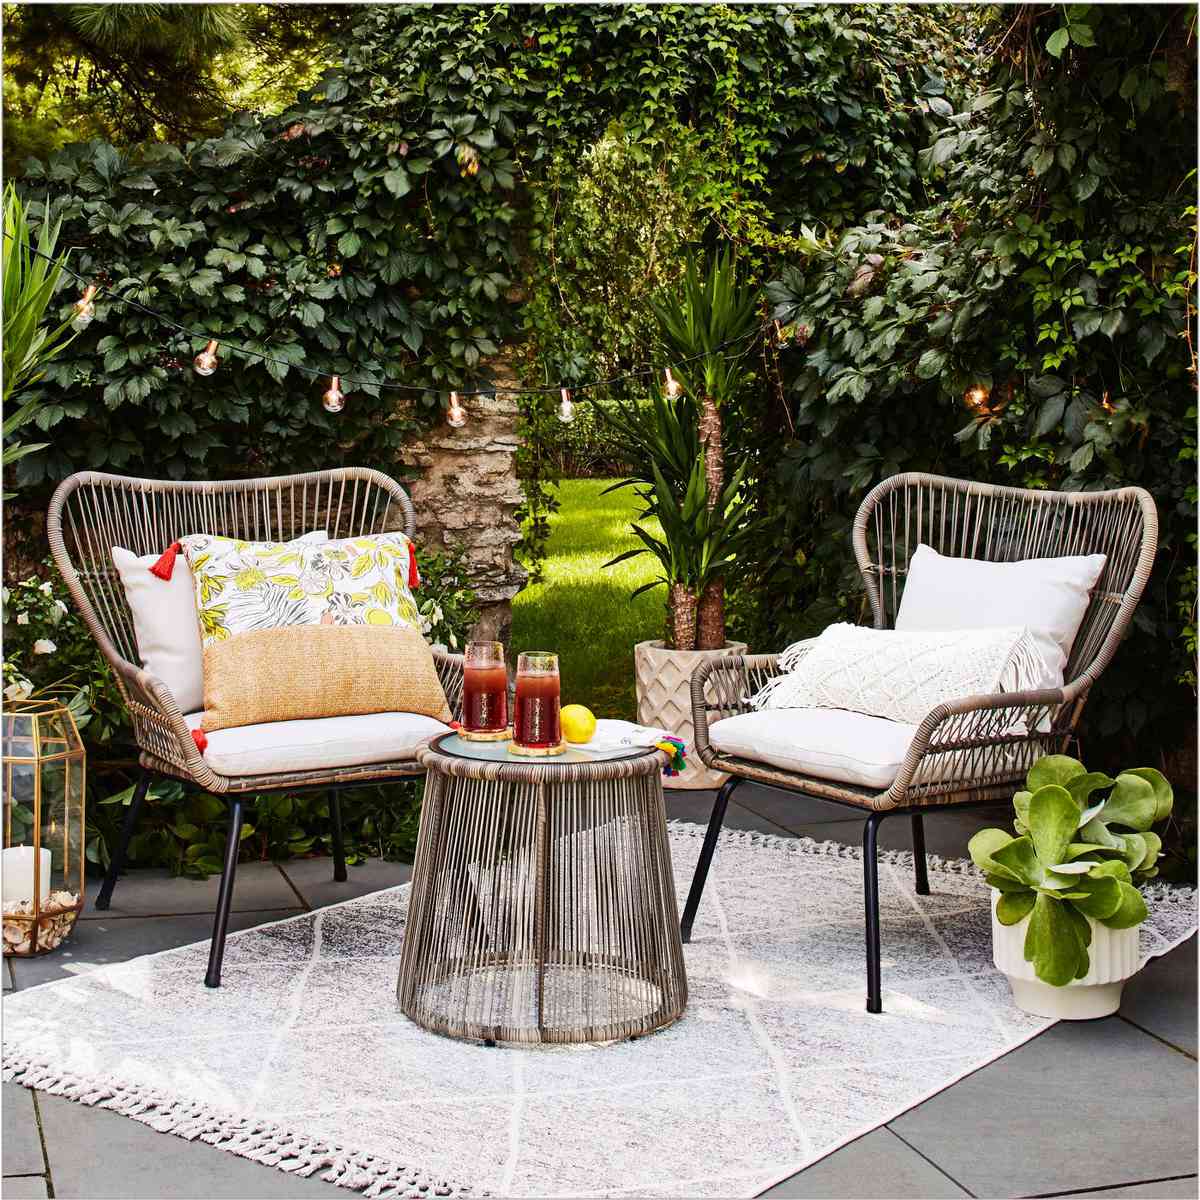 Best Outdoor Furniture For Small Spaces, Best Outdoor Furniture Sets